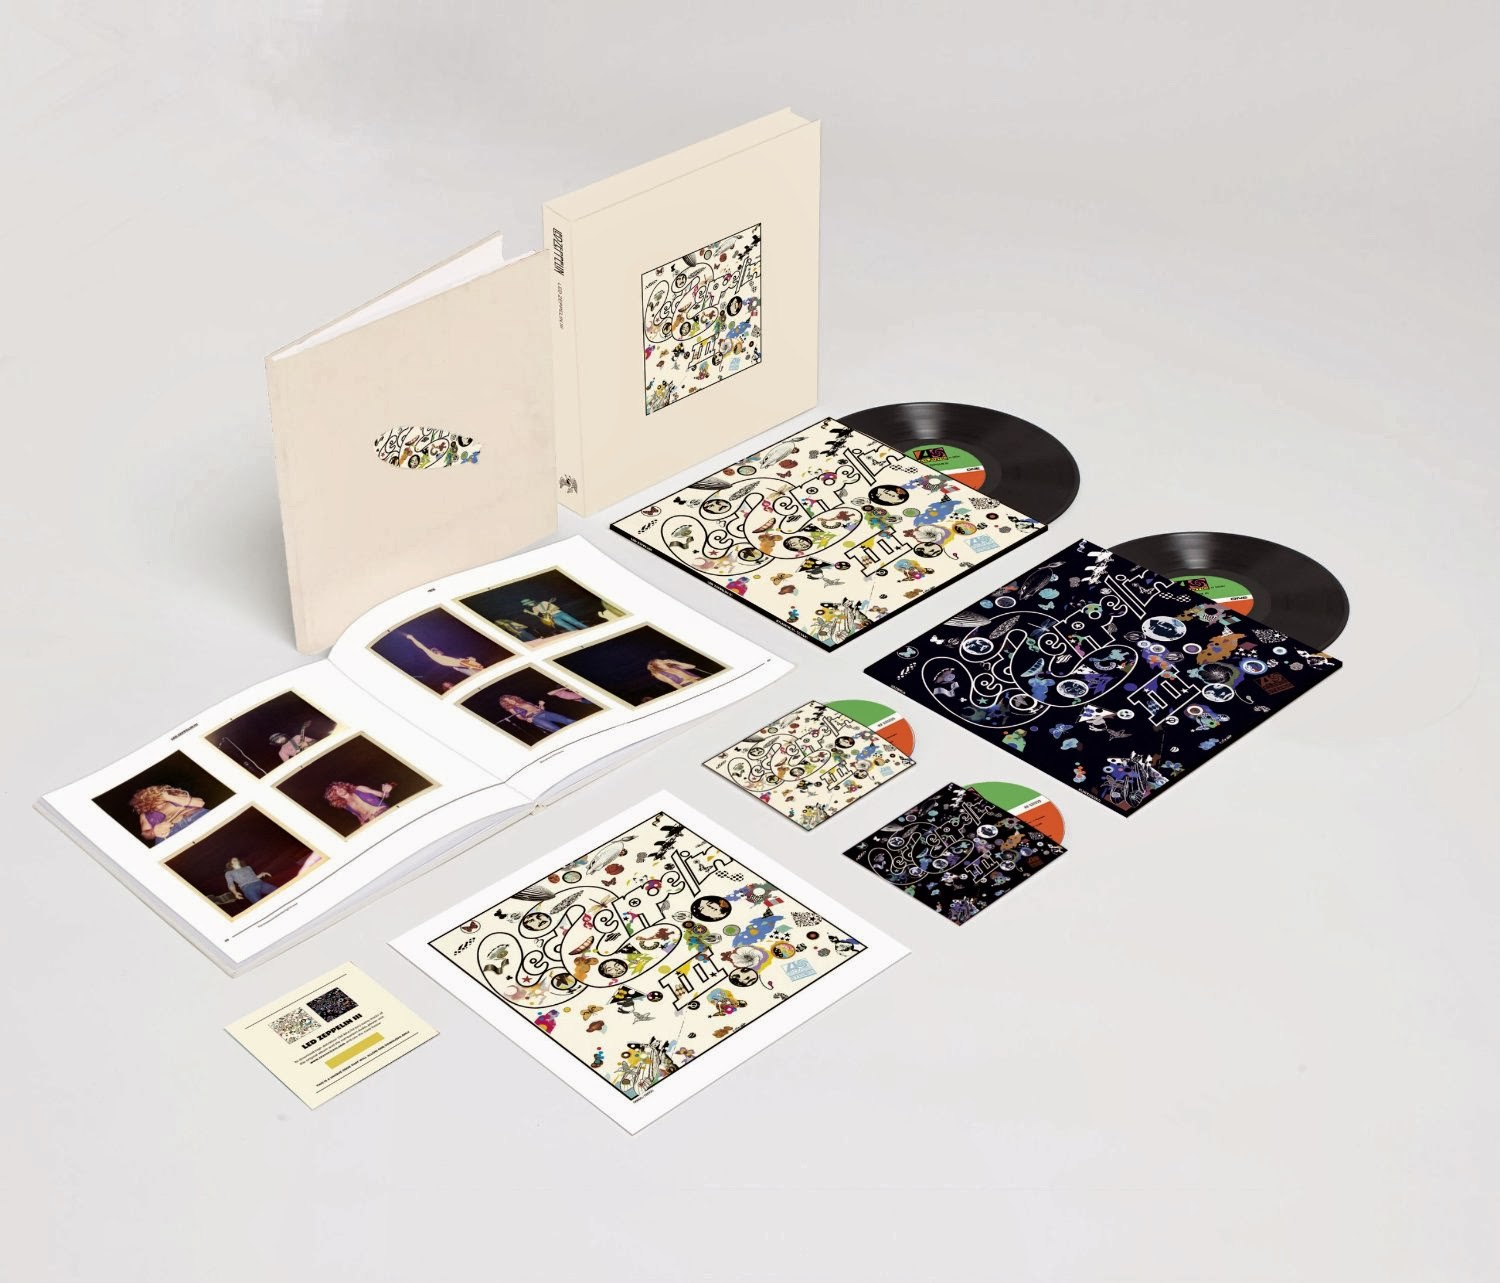 ROCKERPARIS: LED ZEPPELIN to reissue first three albums newly ...